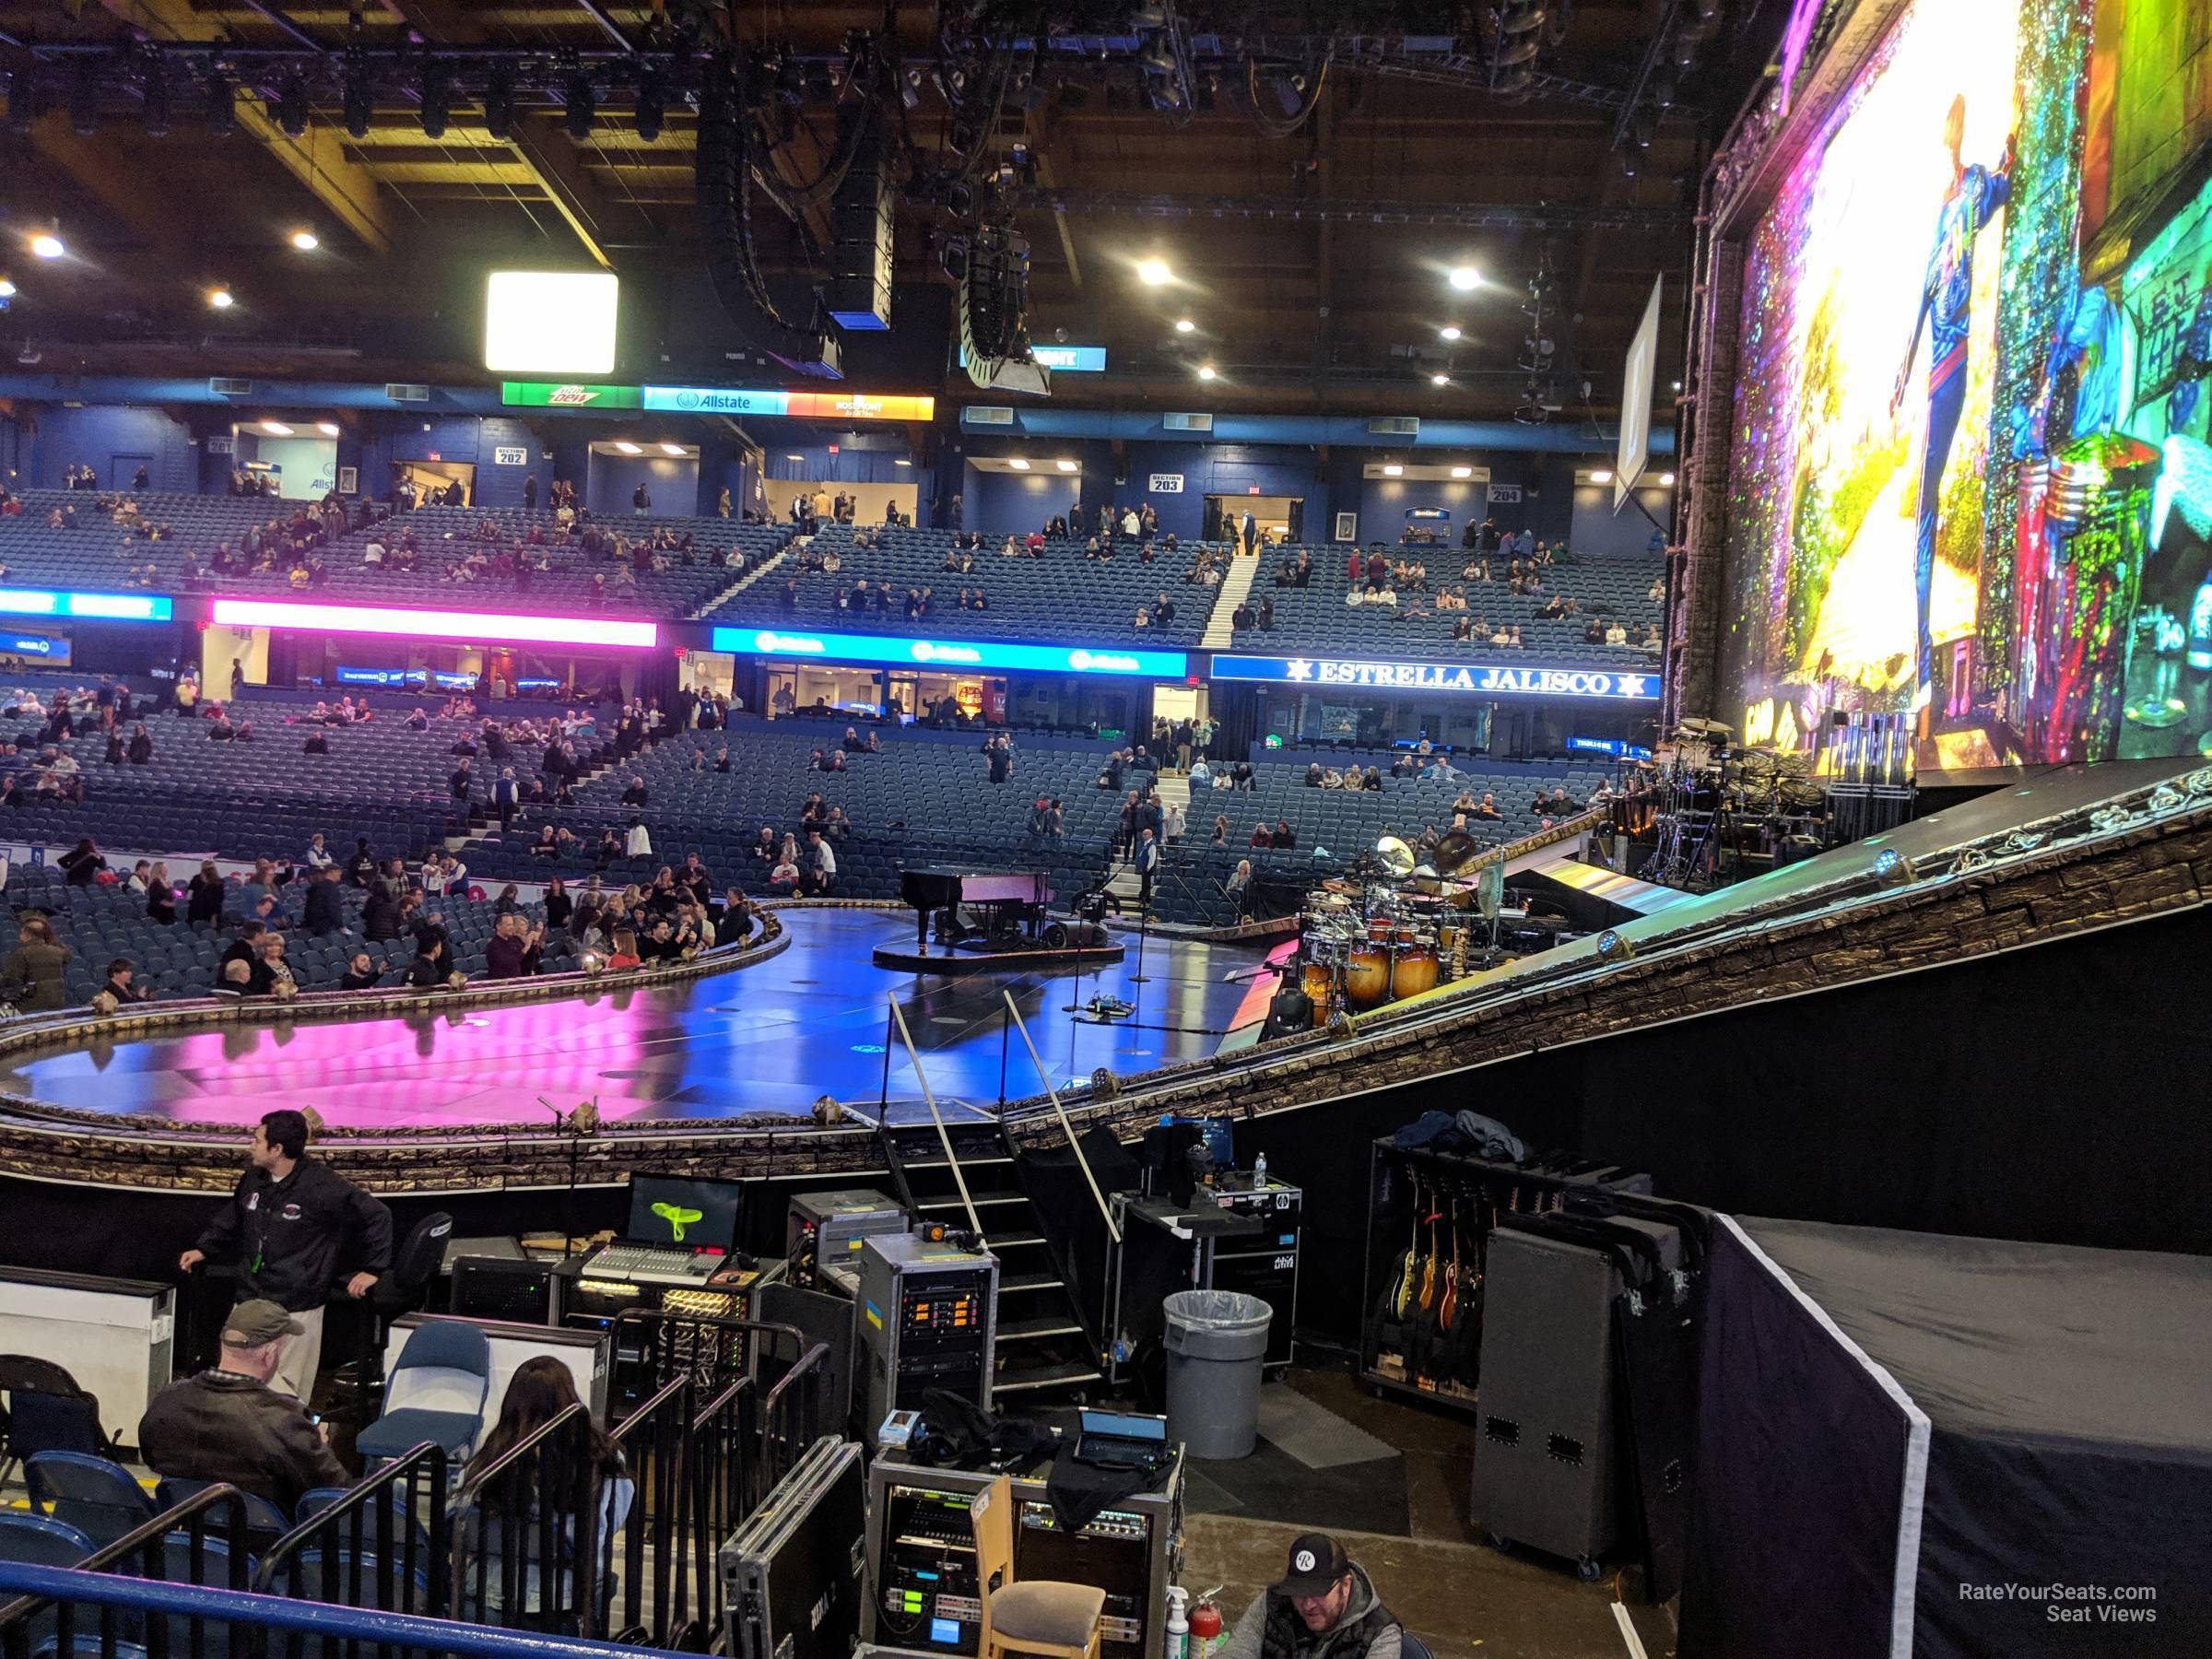 section 109, row d seat view  for concert - allstate arena